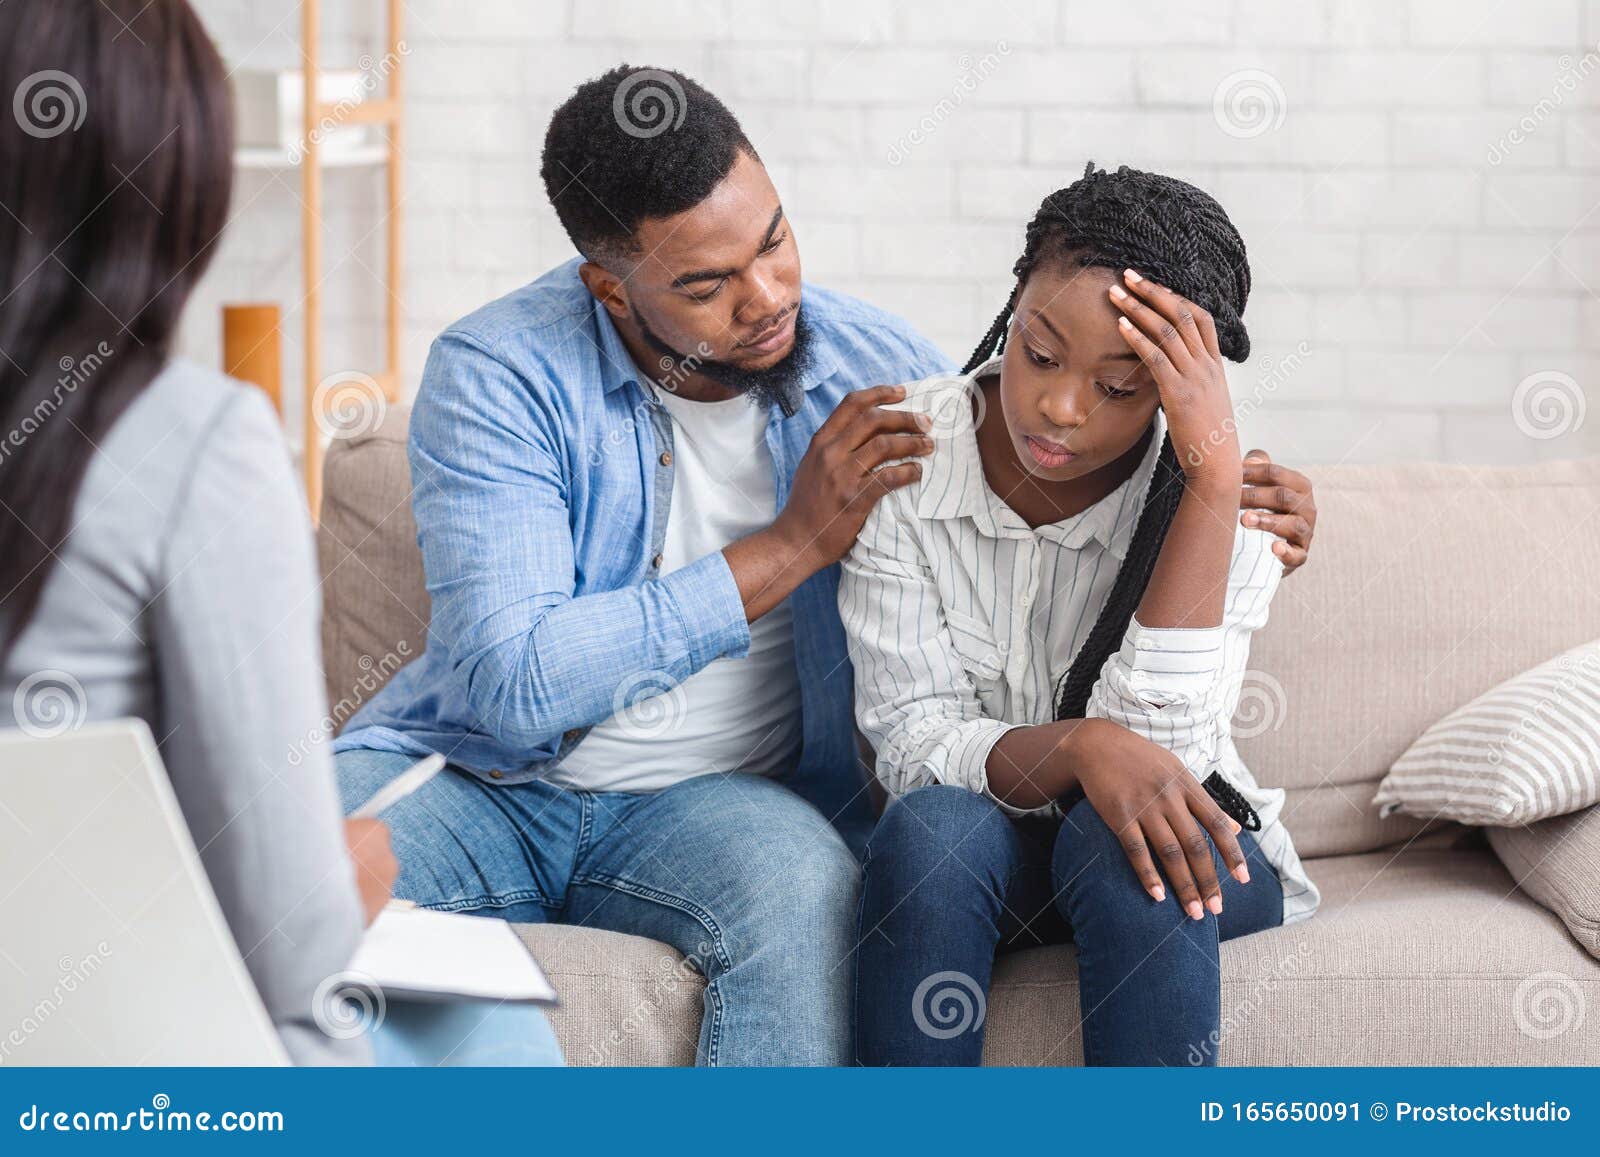 loving husband supporting his depressed wife during psychotherapy session with counselor